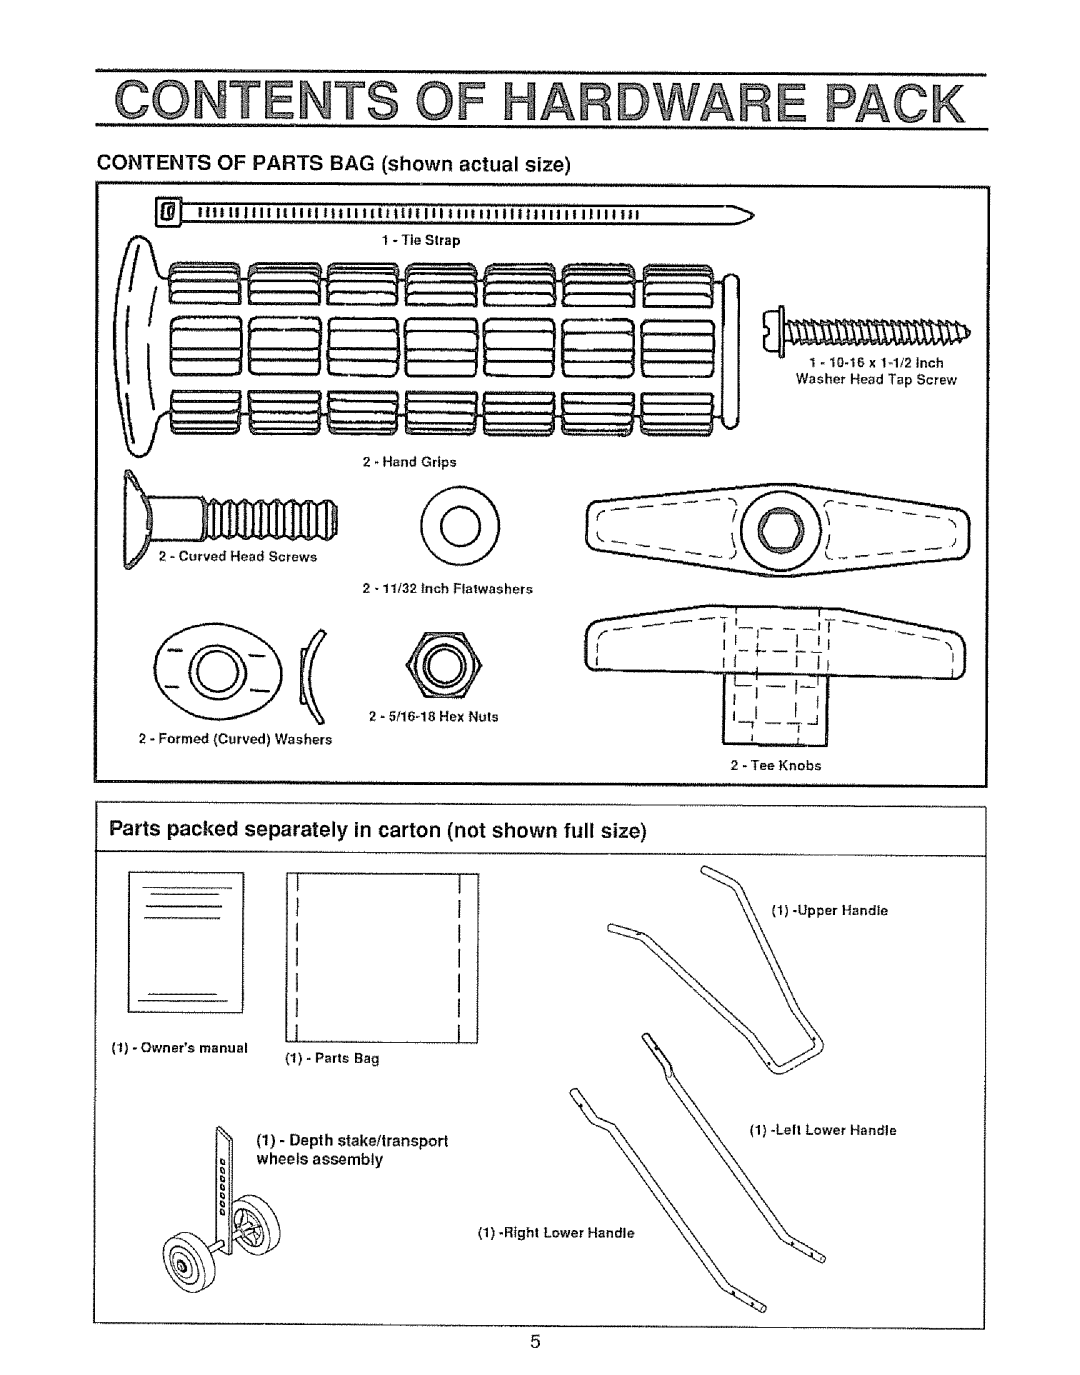 Craftsman 536.7975 manual Oont Ts Of Ha Dwa E Pack, t-l-,I, CONTENTS OF PARTS BAG shown actual size, Depth stake/transport 